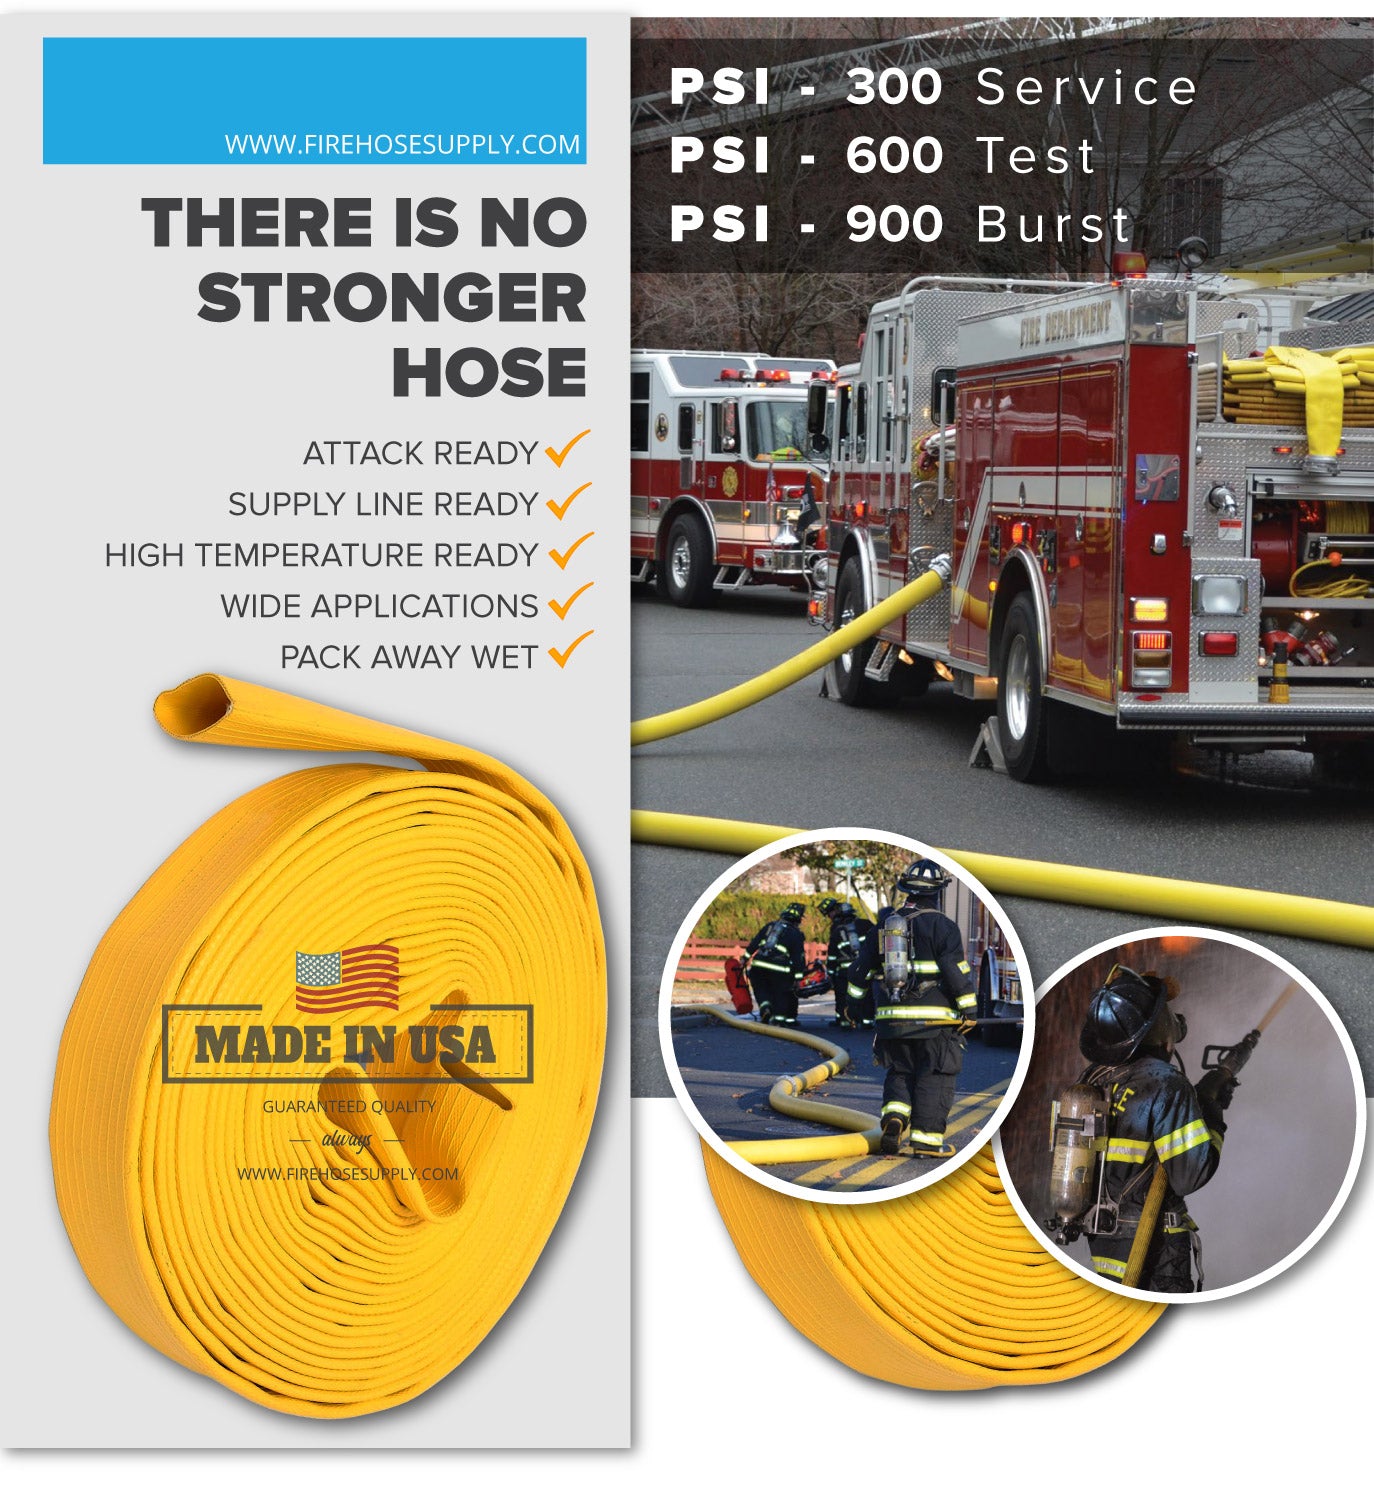 3 Inch Rubber Fire Hose Material Only Supply And Attack Ready Firefighter Yellow 600 PSI Test